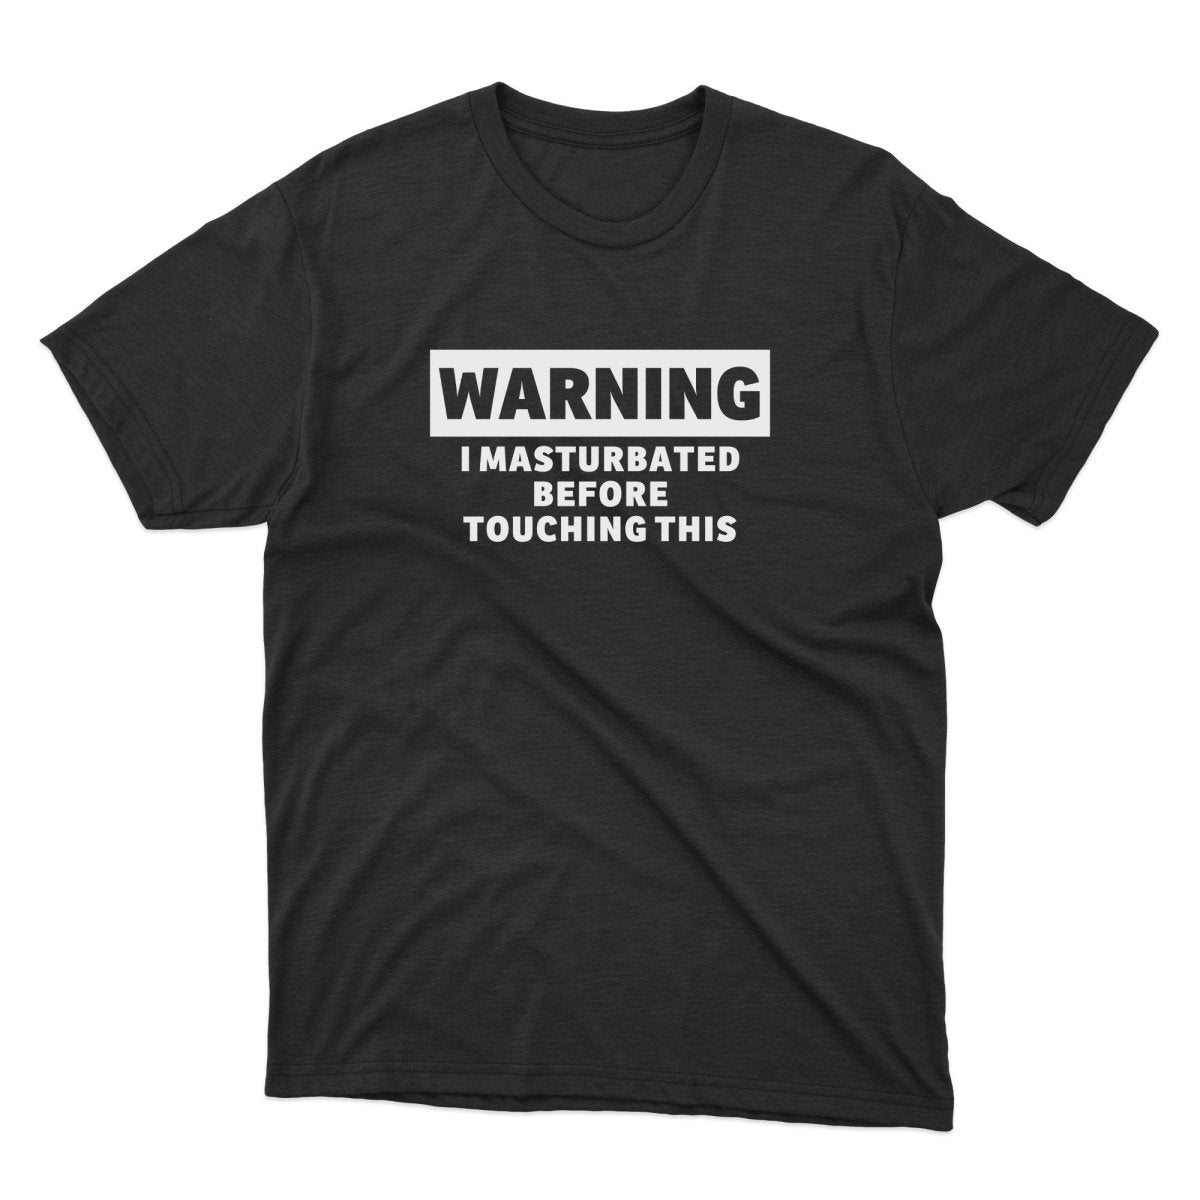 Warning I Masturbated Before Touching This Shirt - stickerbullWarning I Masturbated Before Touching This ShirtShirtsPrintifystickerbull32285798810223222161BlackSa black t - shirt with the words warning on it